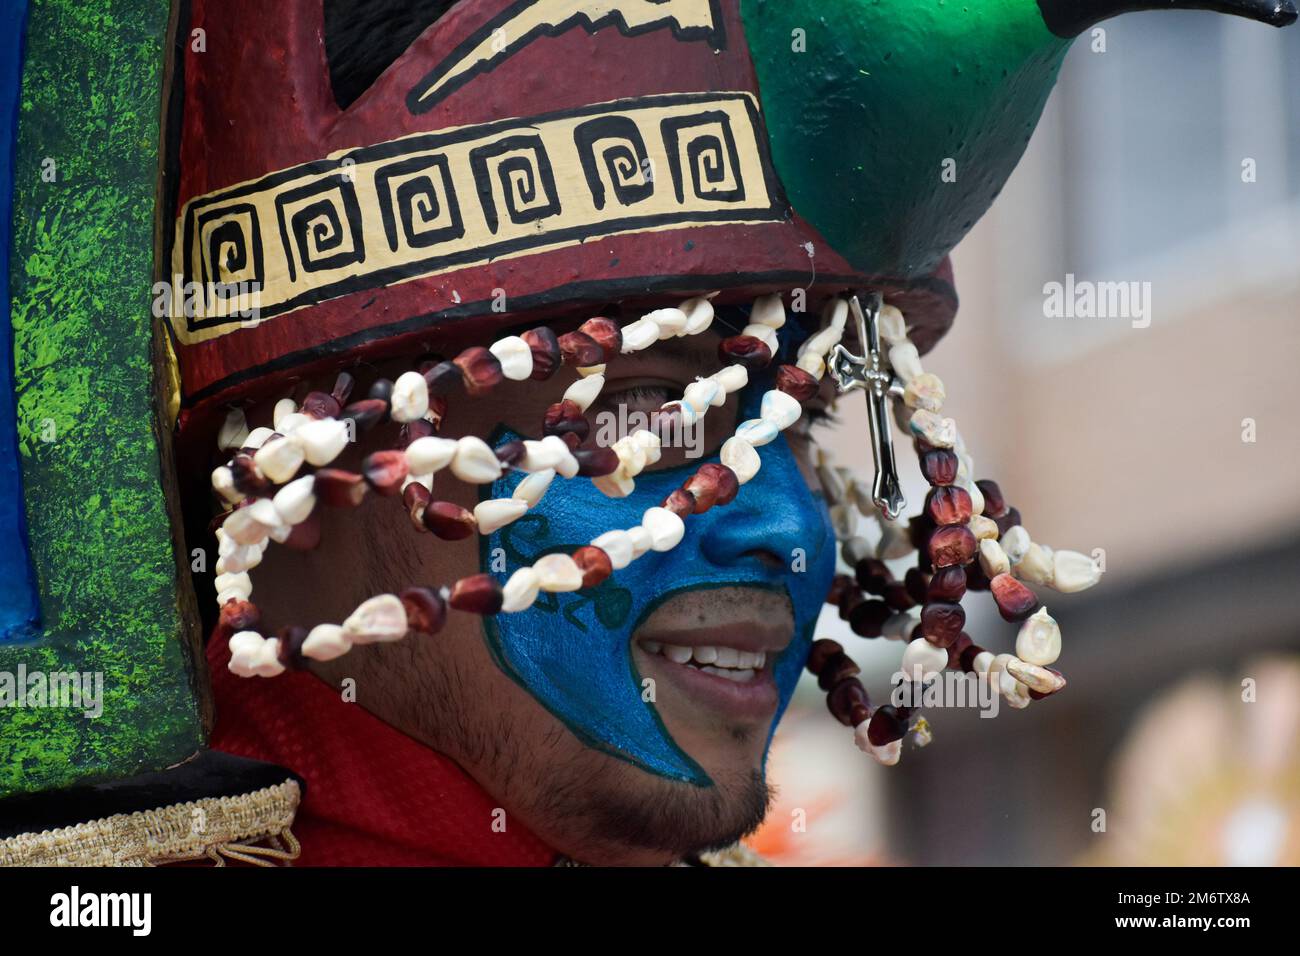 Pasto, Nariño, January 3, 2023. Artists and performers dance during the traditional 'Carnaval de Negros y Blancos' in Pasto, Nariño, January 3, 2023. This UNESCO-recognized carnival takes place every January in the Southern Andean city of Pasto. The ''Carnaval de Negros y Blancos'' has its origins in a mix of Amazonian, Andean and Pacific cultural expressions though art, dances, music and cultural parties. Photo by: Camilo Erasso/Long Visual Press Stock Photo